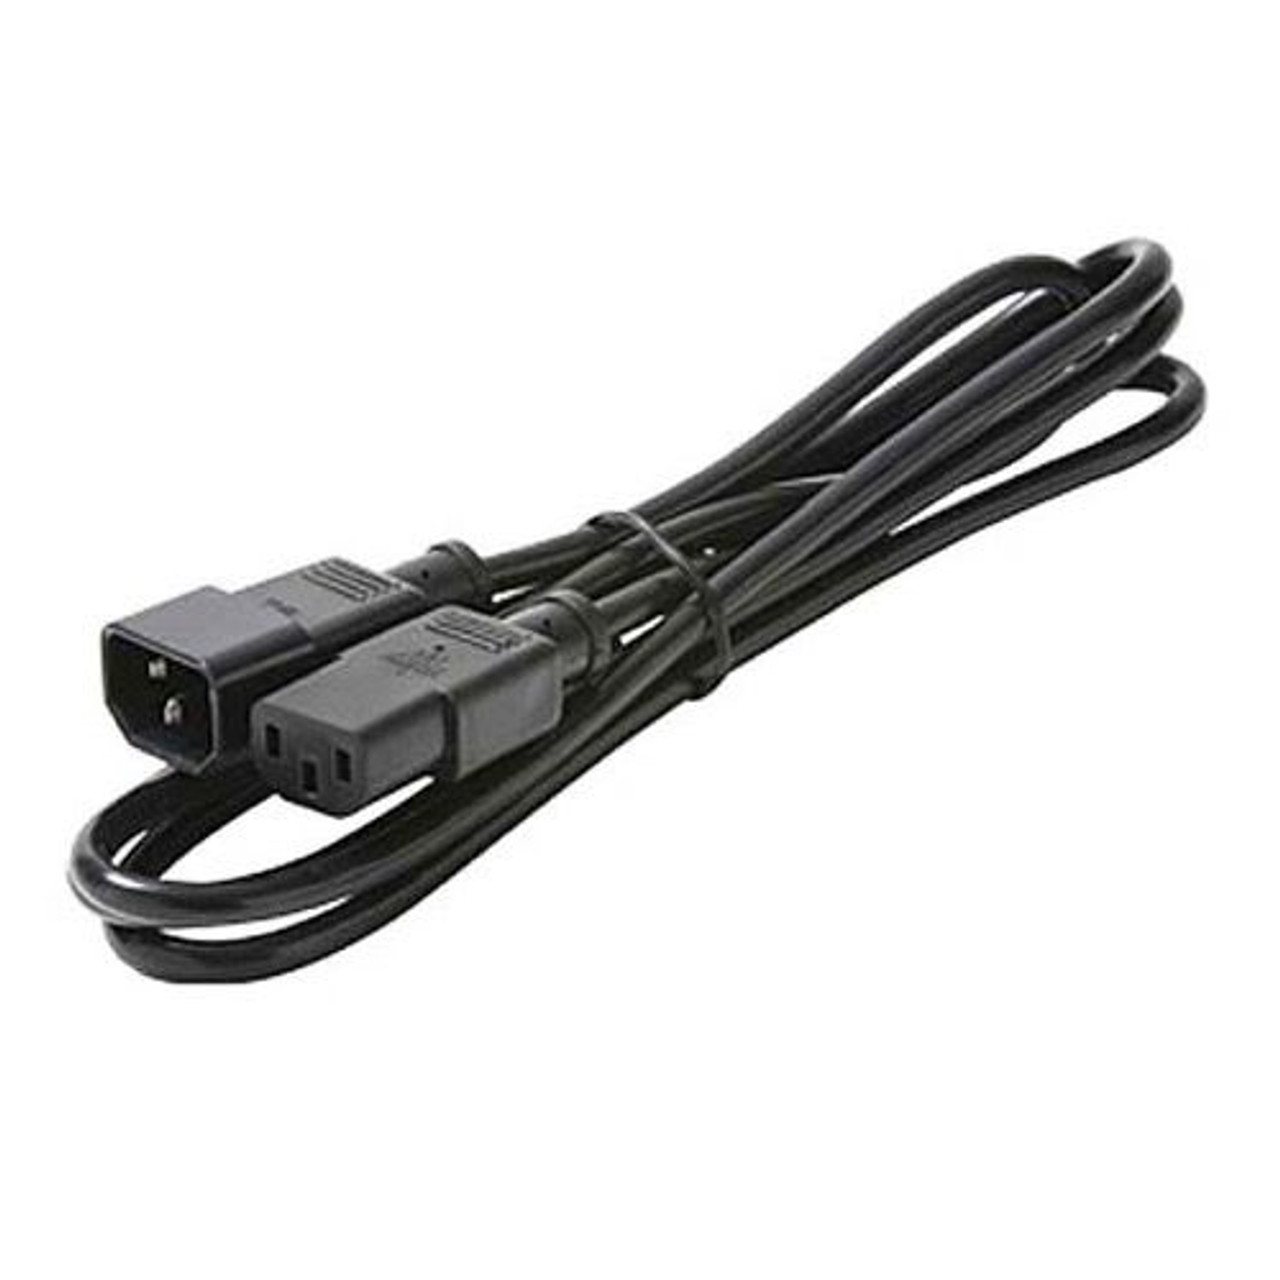 Eagle 6' FT AC Power Extension Cord 18/3 3-Wire PC Computer 120 VAC Black 15 Amp Conductor Stranded Copper 1875 Watt UL Listed Double Insulated Grounded Black Jacket 18 AWG Cable